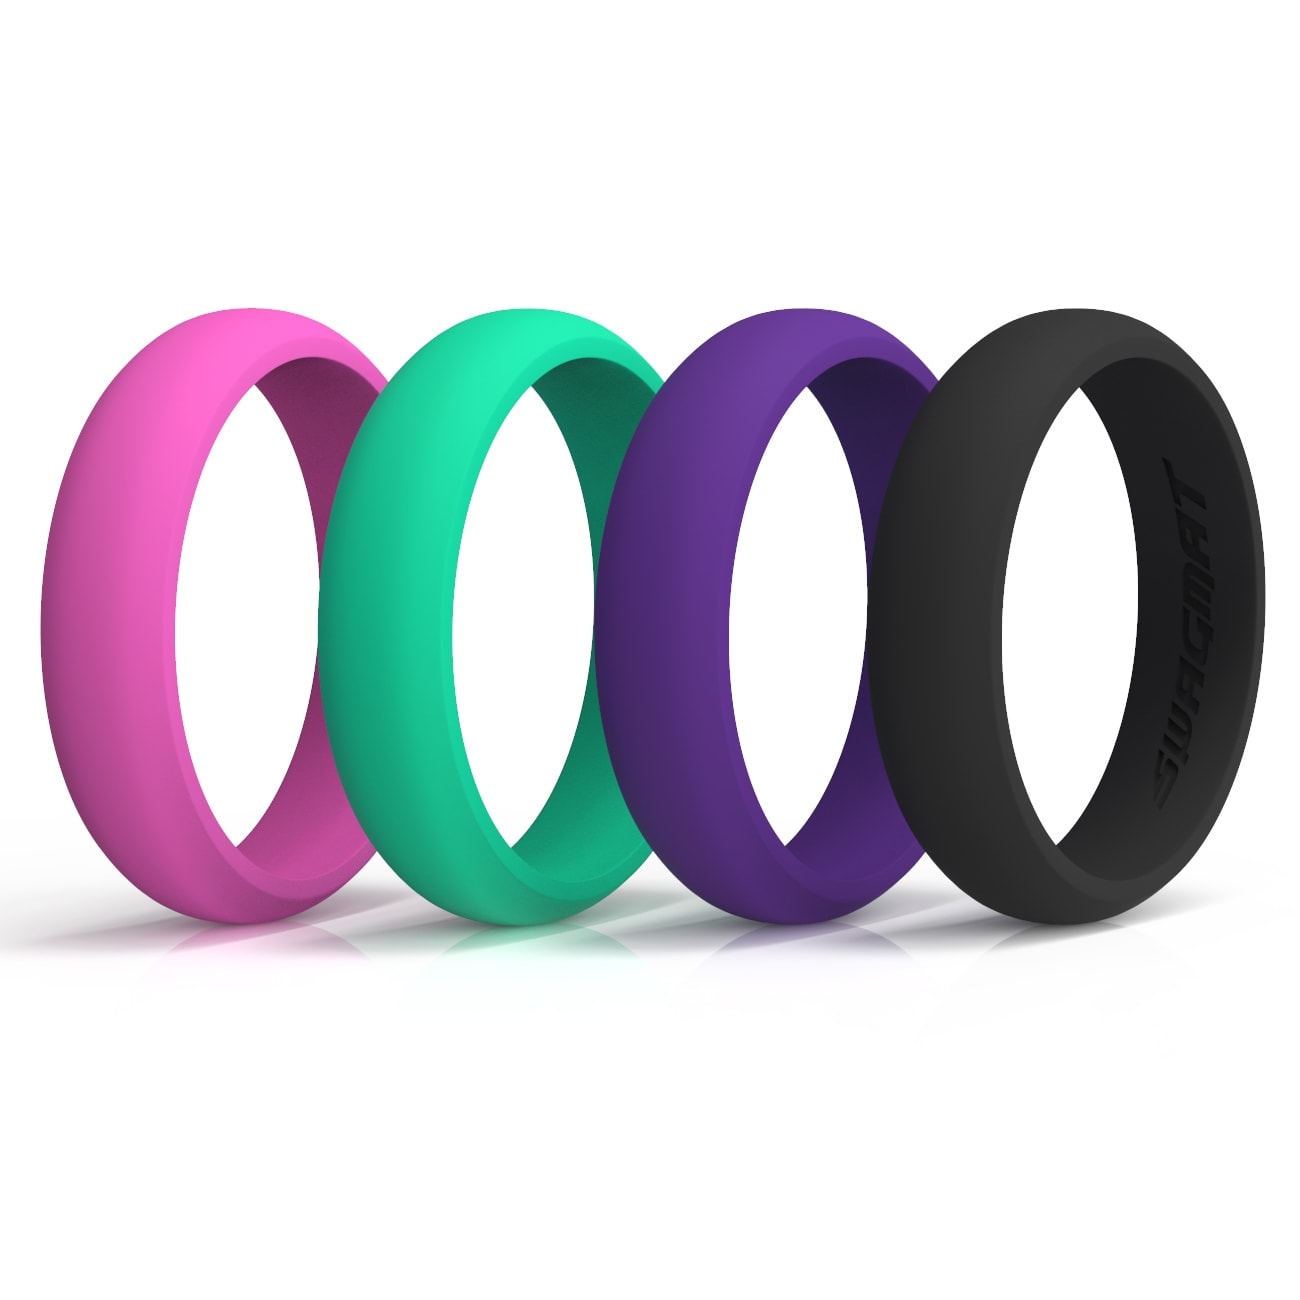 Classic Popart Silicone Rings Set | Swagmat